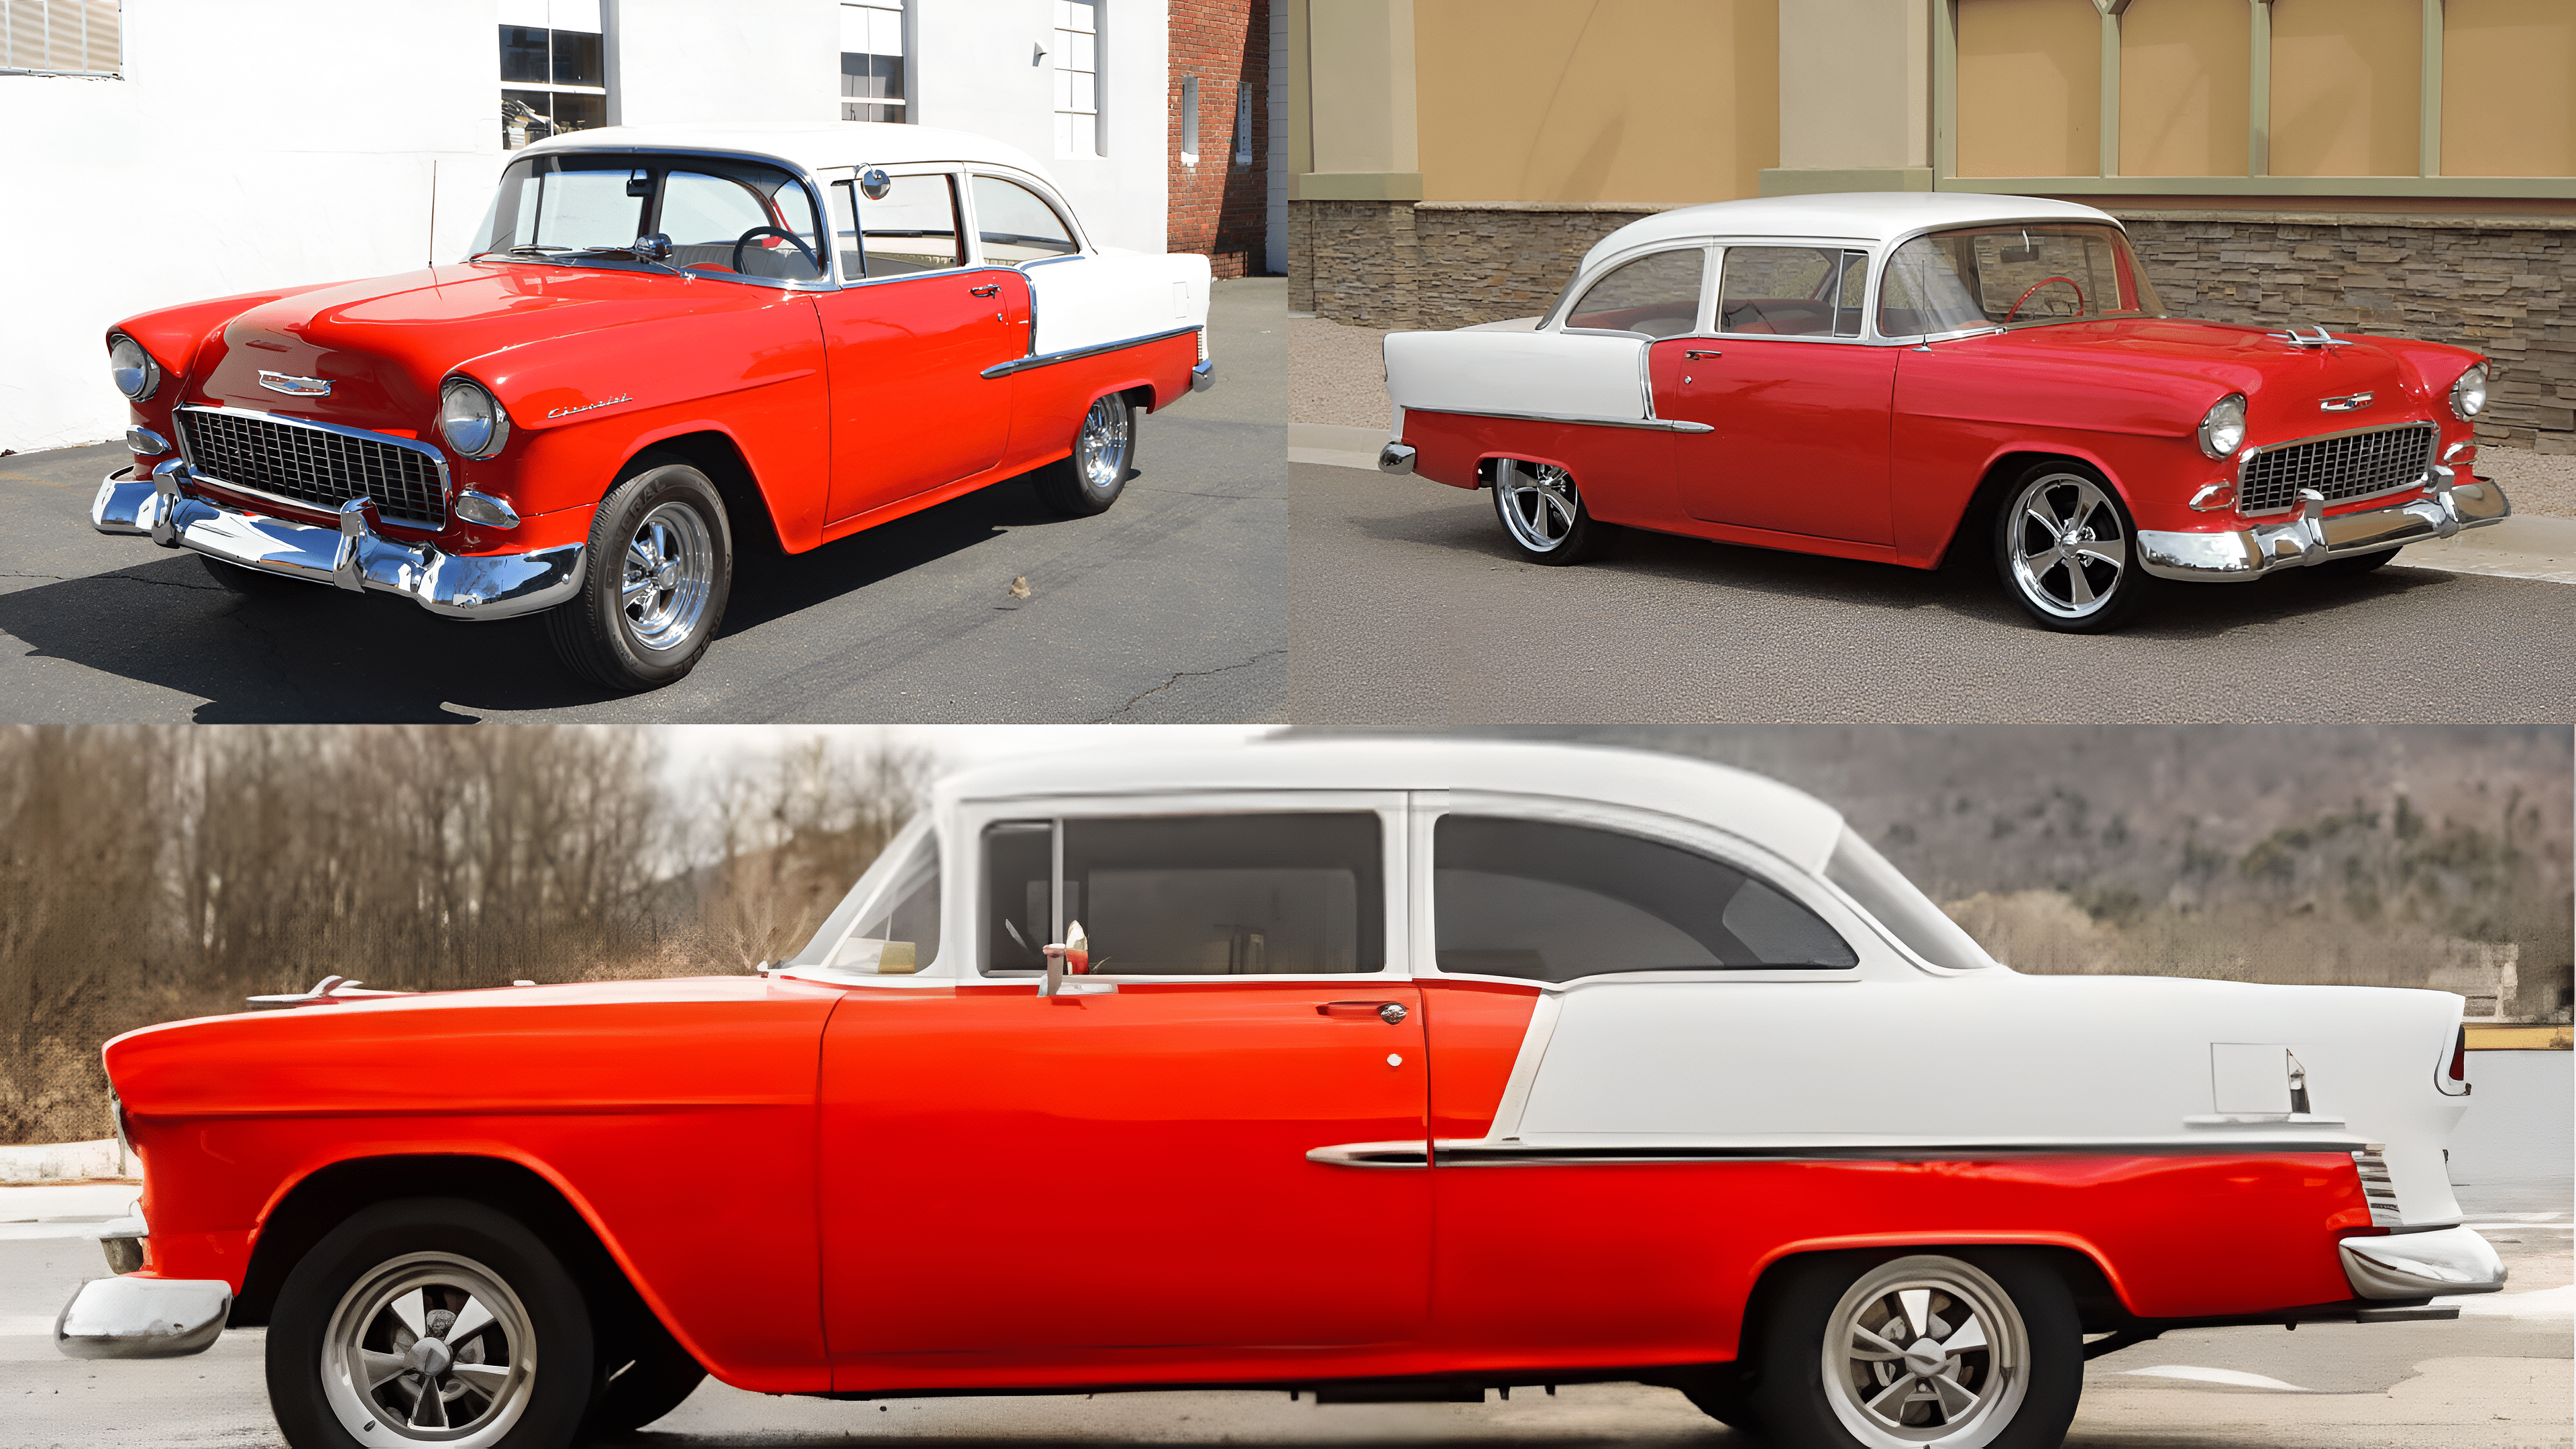 1955 Chevrolet 210 in Red and white exterior